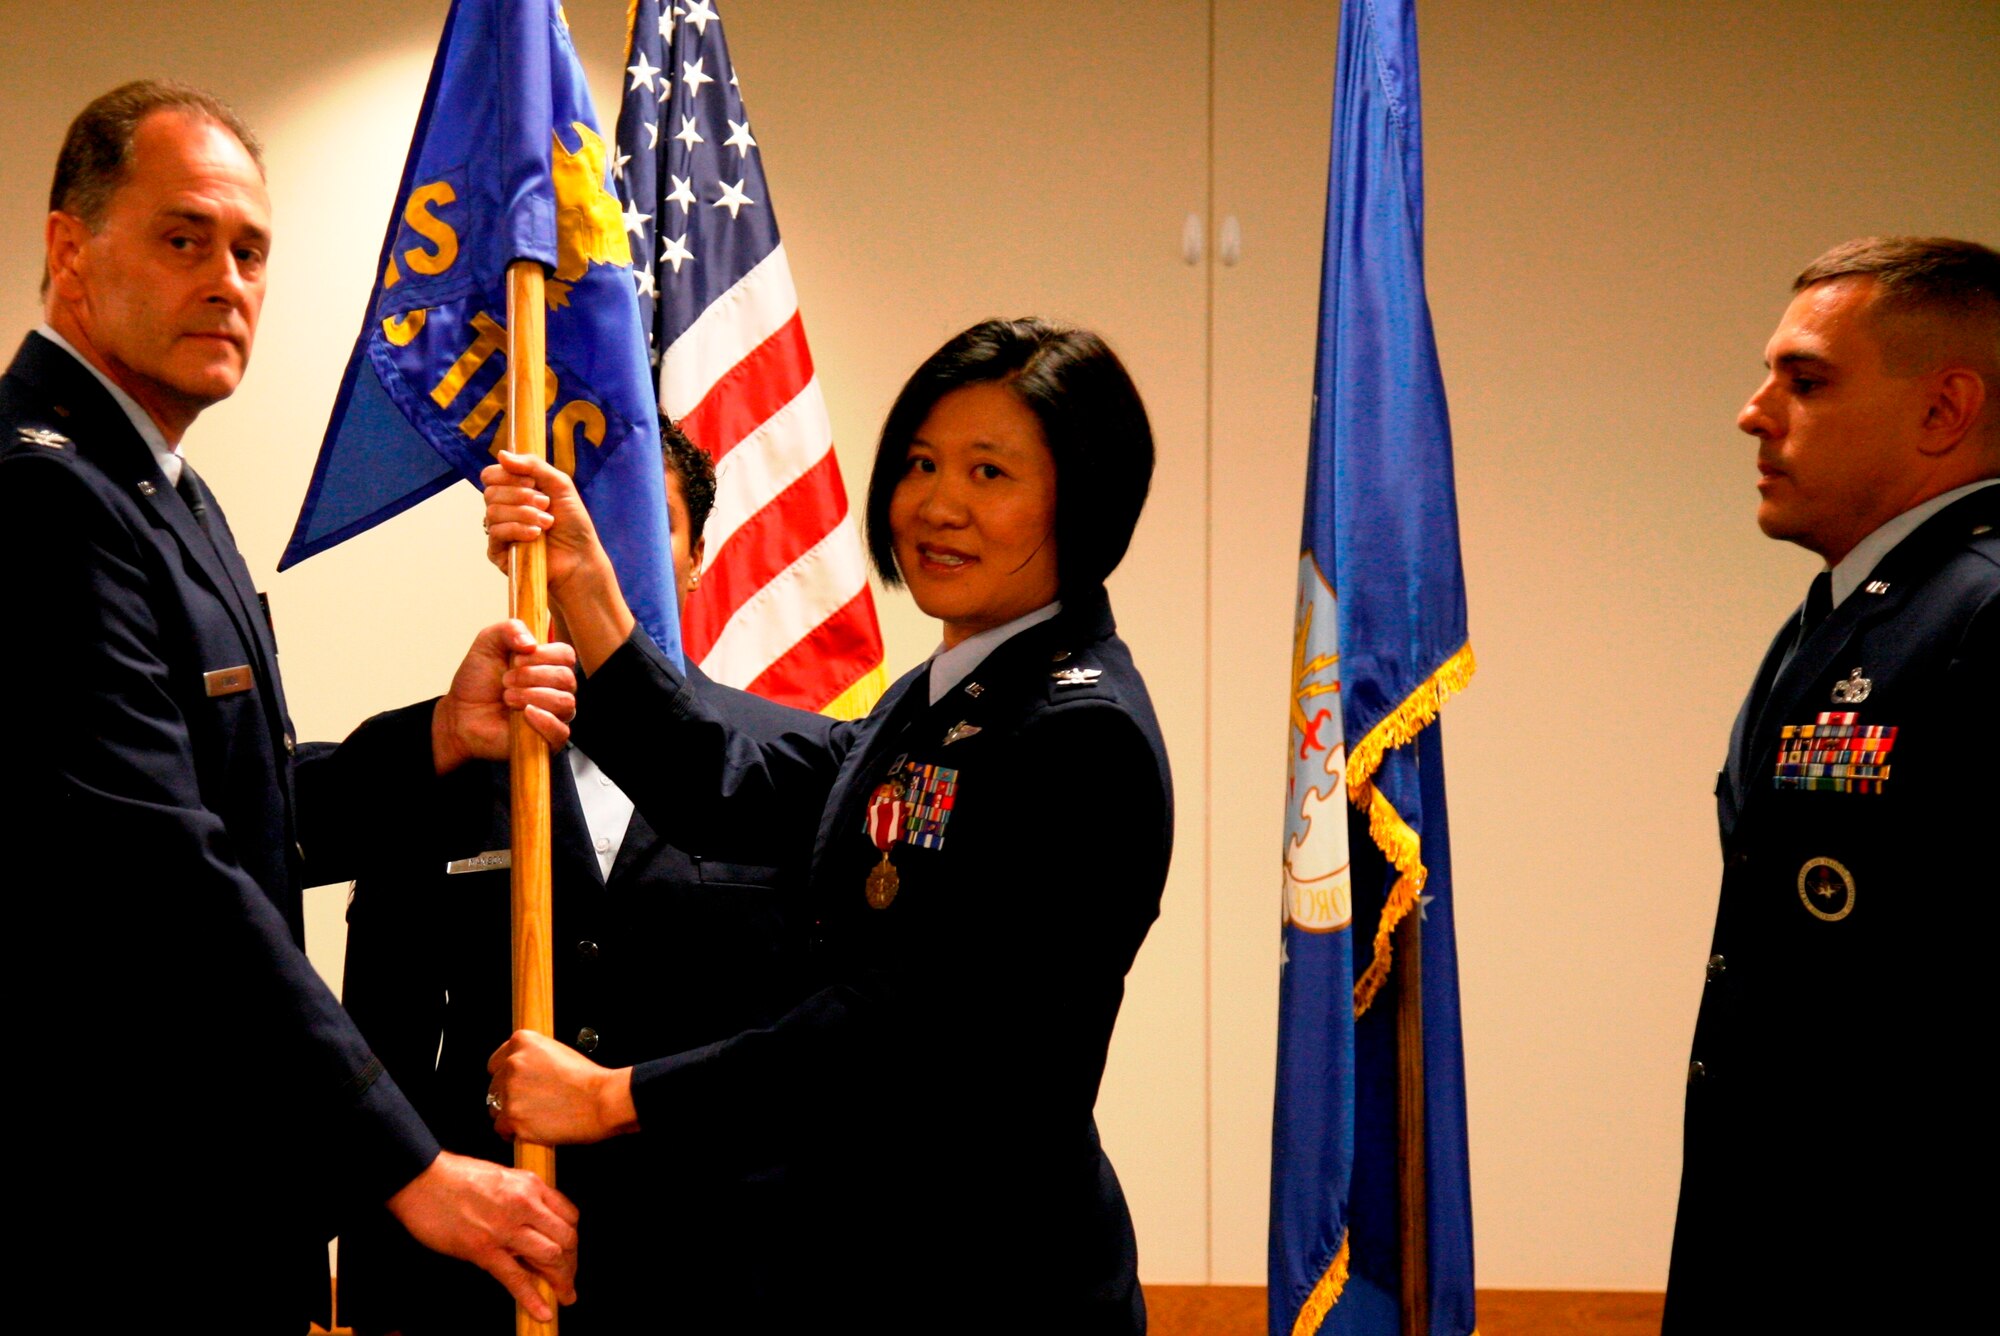 433rd Training Squadron Change of Command